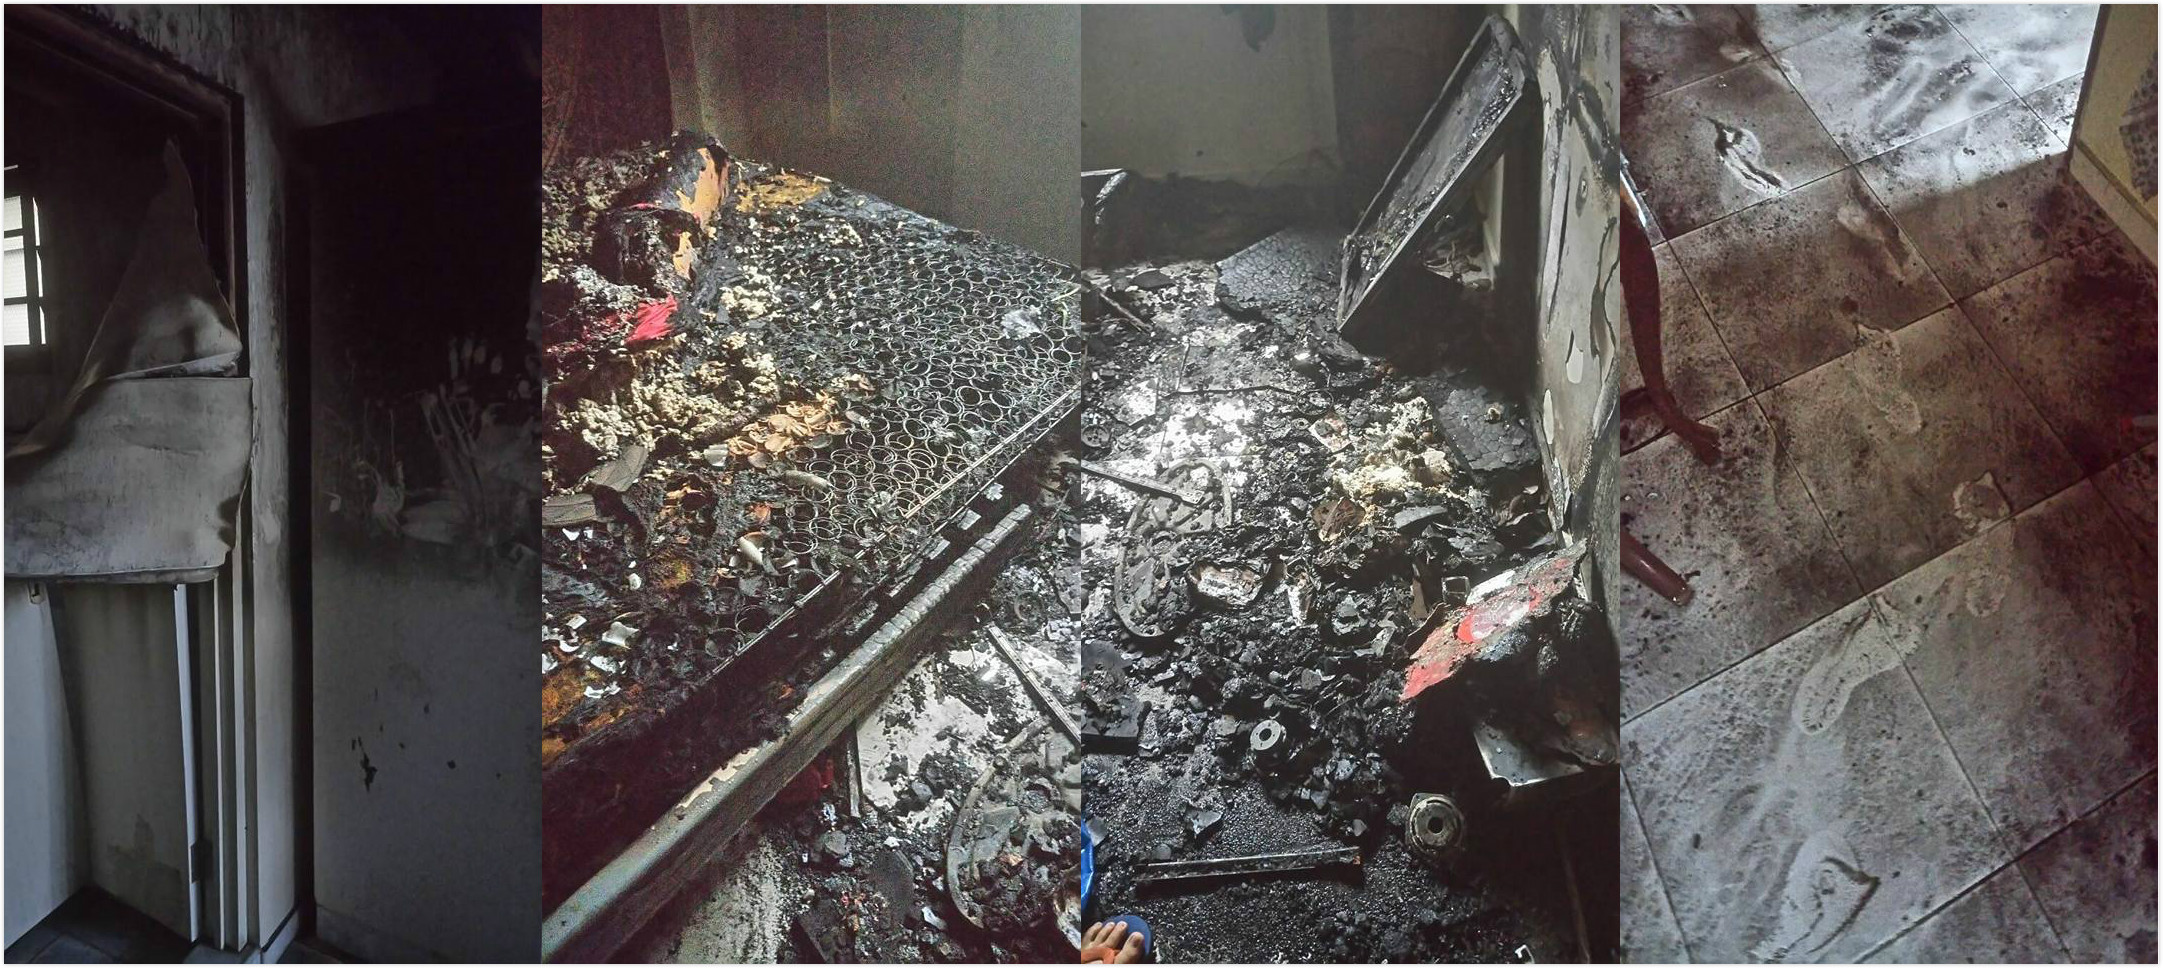 Her HDB home burned down: what is this girl going to do? 